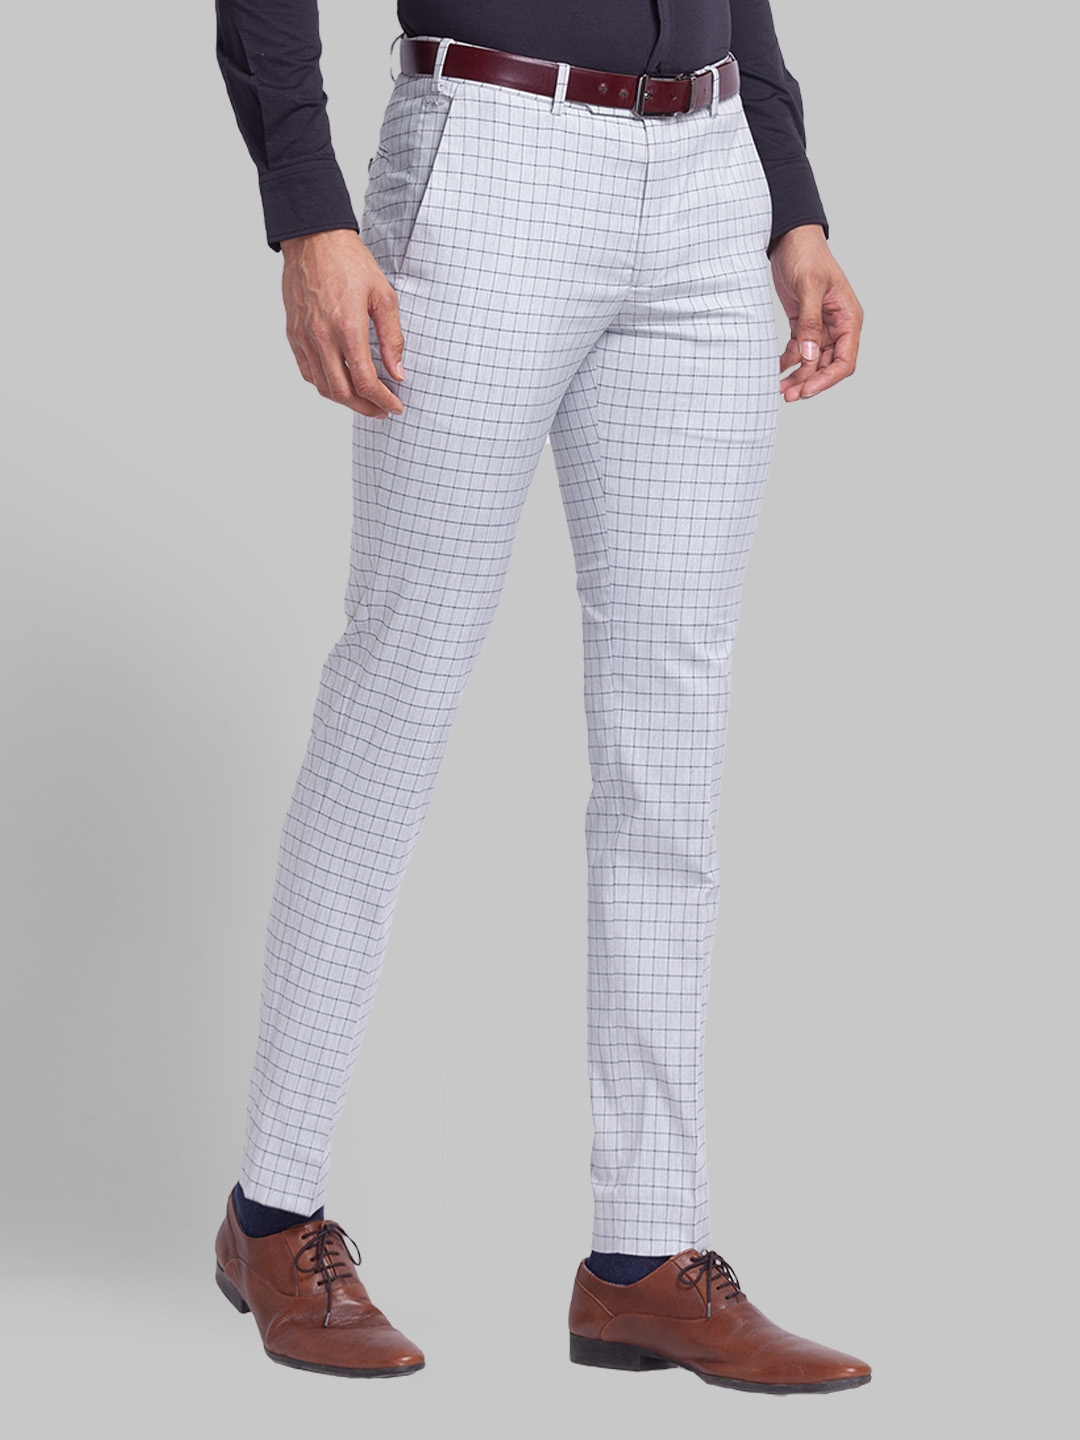 Buy Peter England Men Grey Neo Slim Fit Solid Formal Trousers - Trousers  for Men 8657583 | Myntra